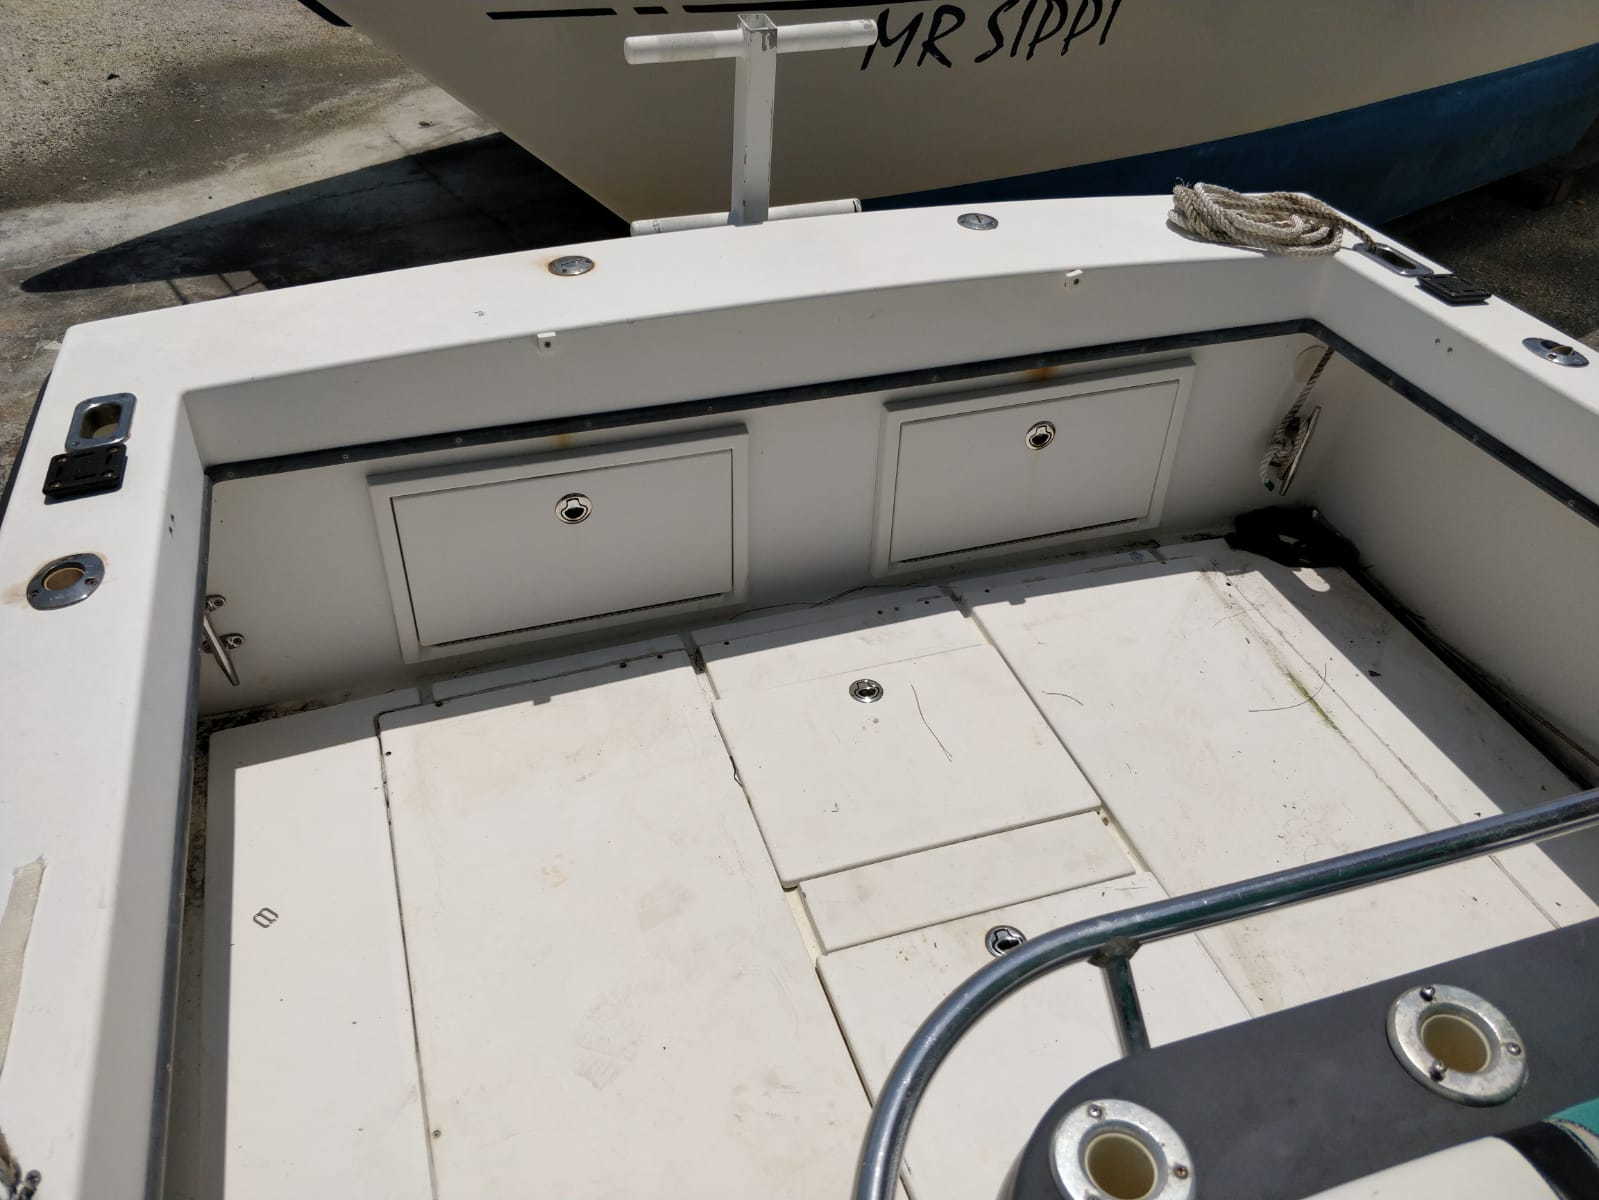 Rebuilding my wife's boat - Page 3 - The Hull Truth - Boating and